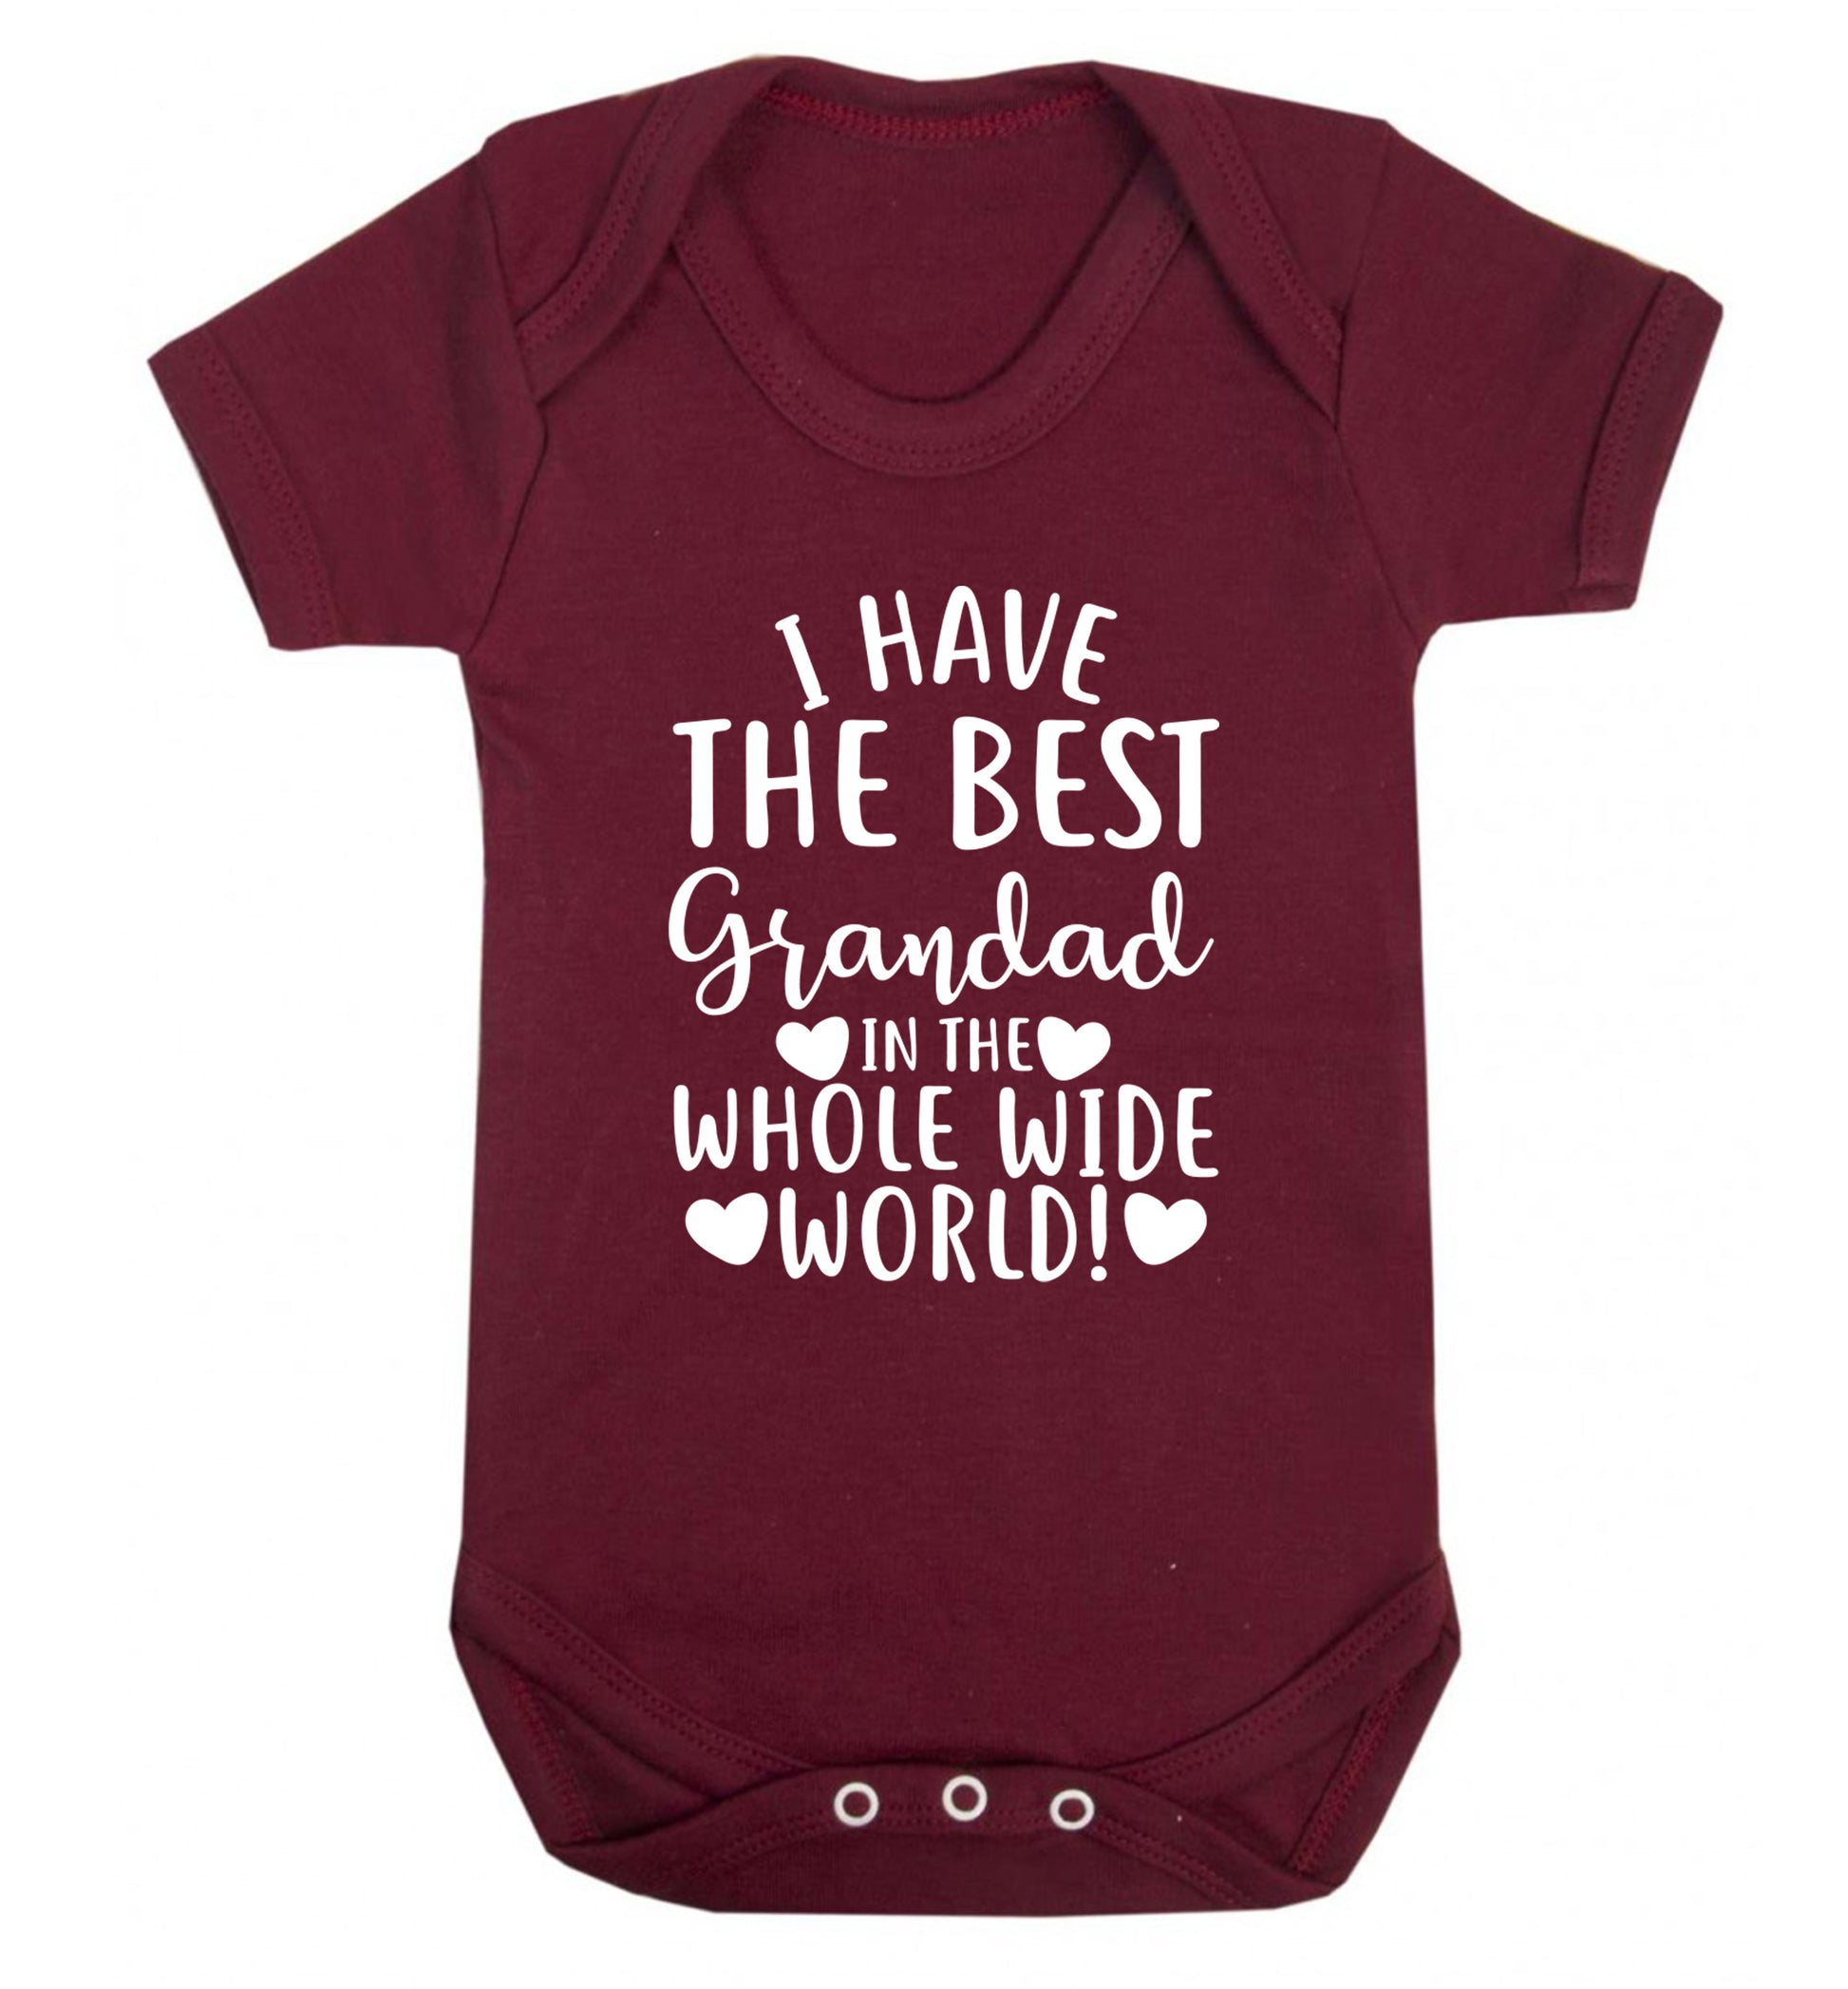 I have the best grandad in the whole wide world! Baby Vest maroon 18-24 months